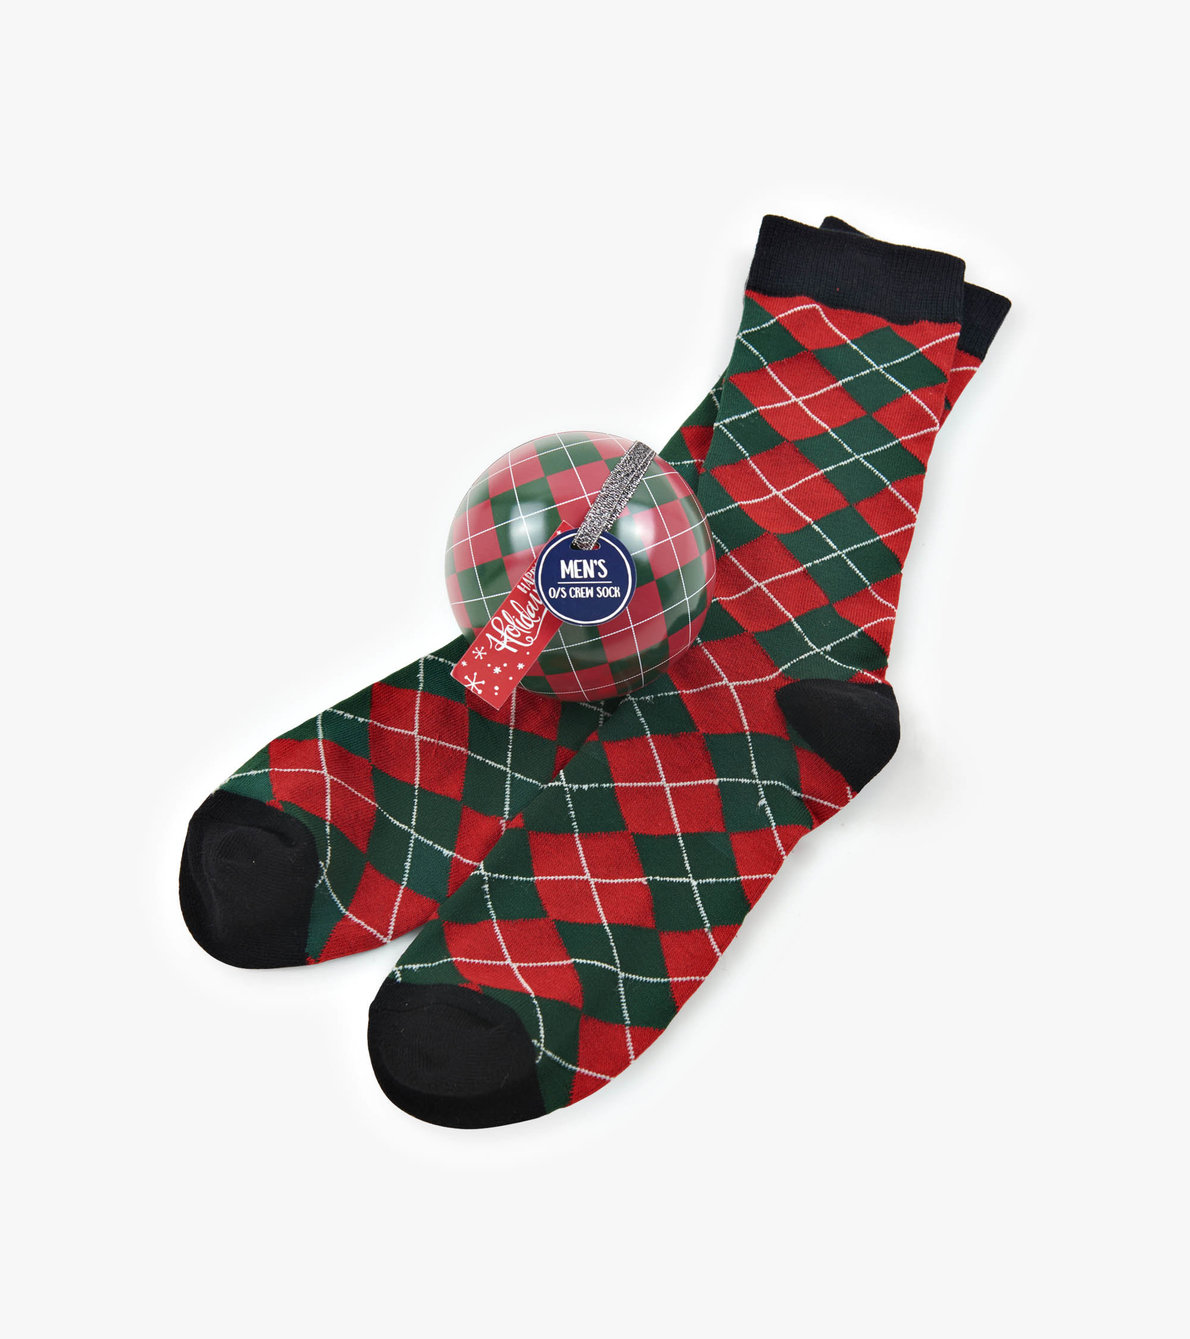 View larger image of Holiday Argyle Men's Socks in Balls